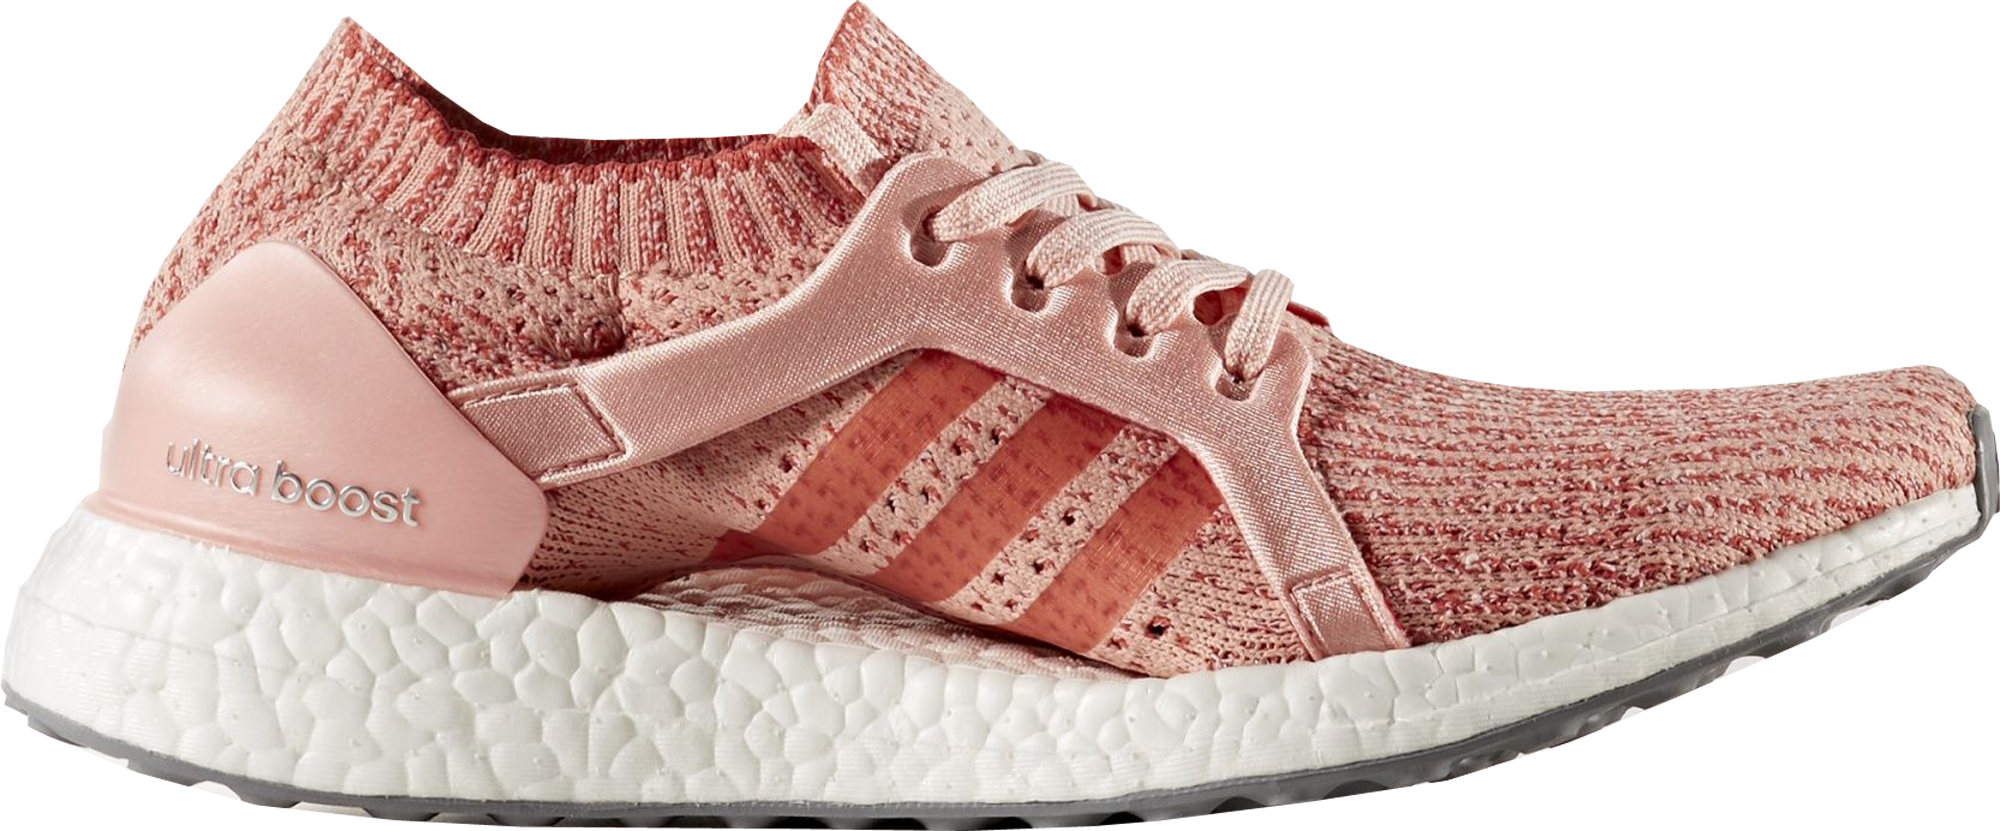 adidas pure boost x pink